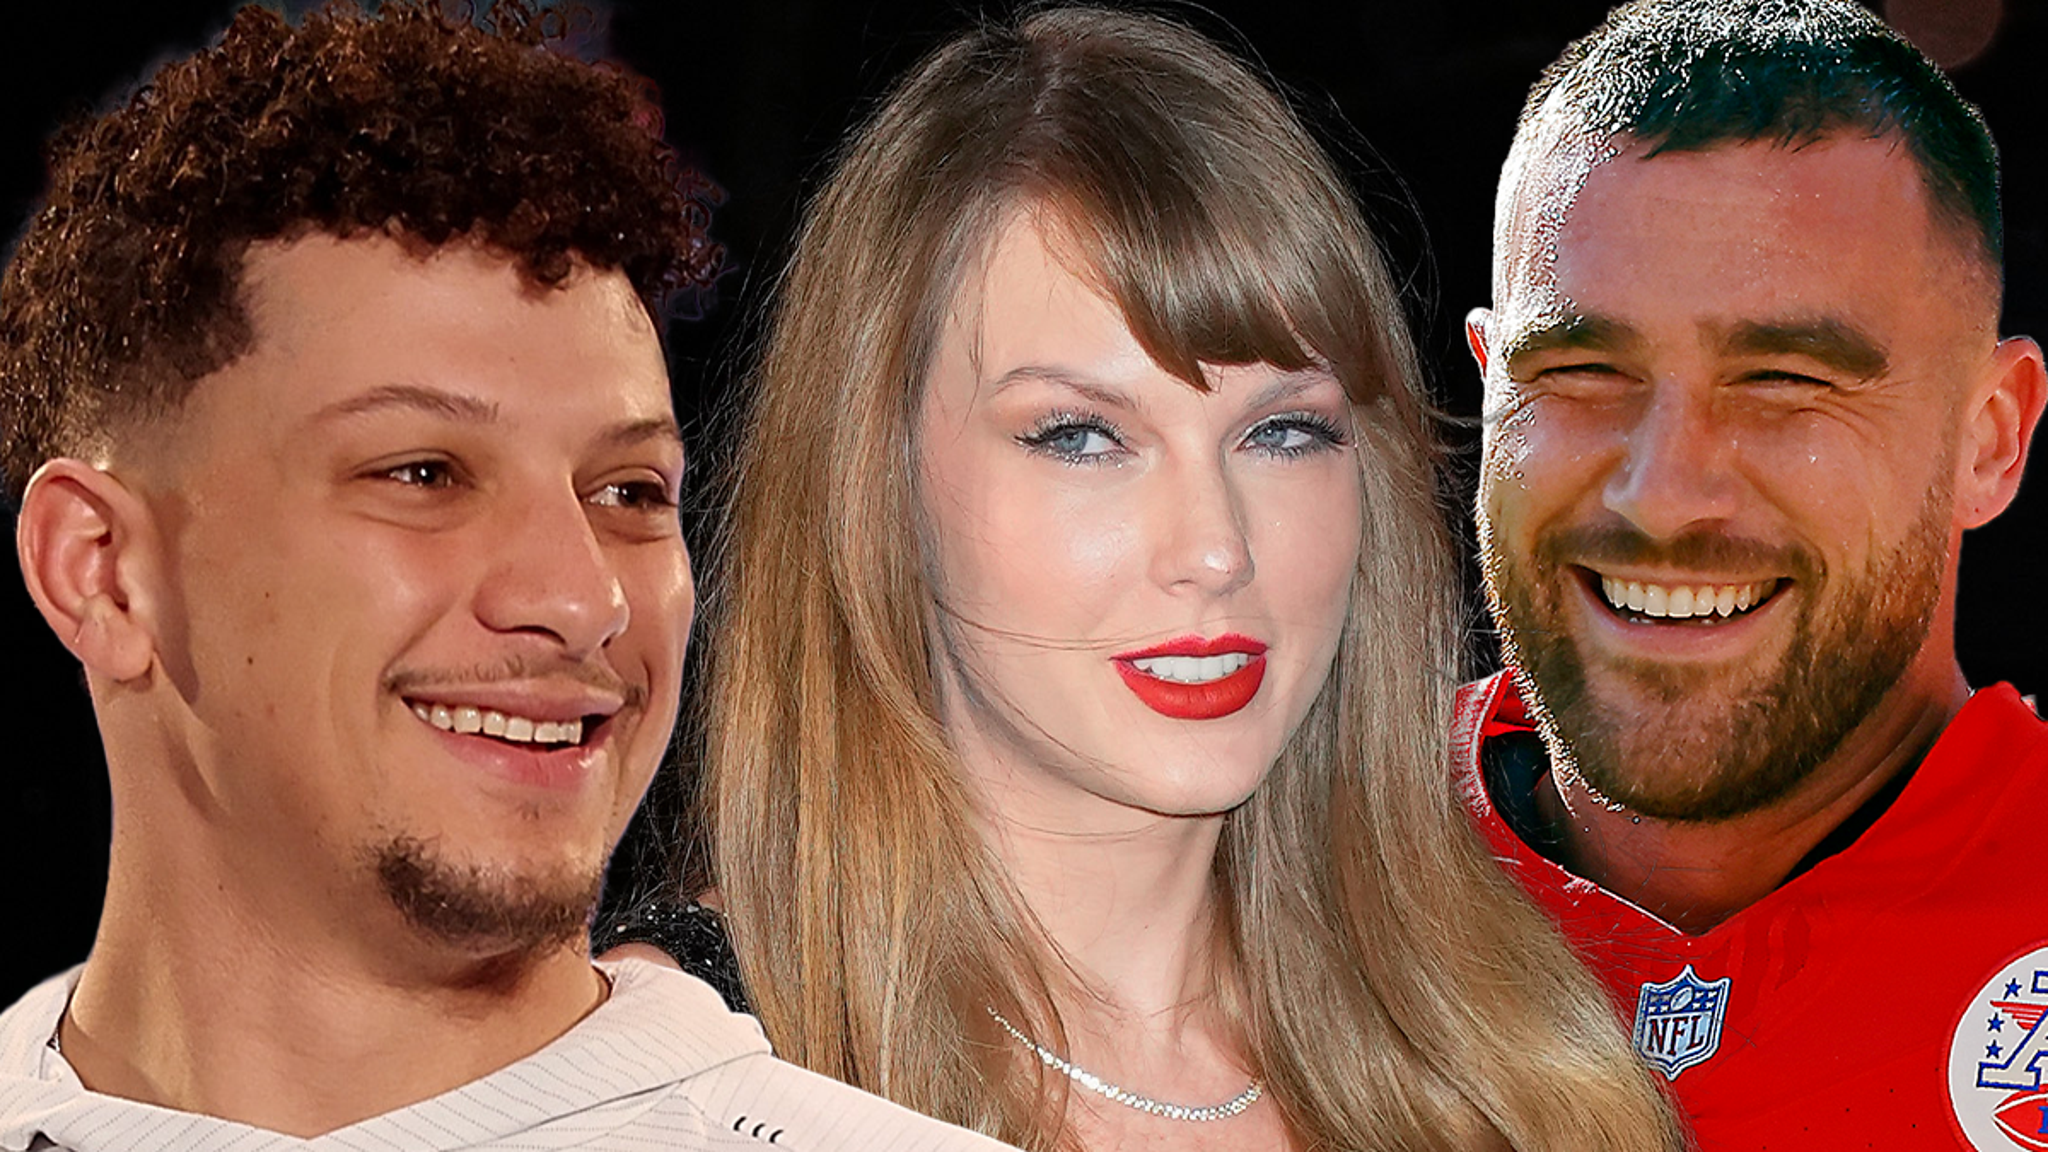 Patrick Mahomes Says Taylor Swift Is Part Of The Chiefs, Team’s Embracing Her